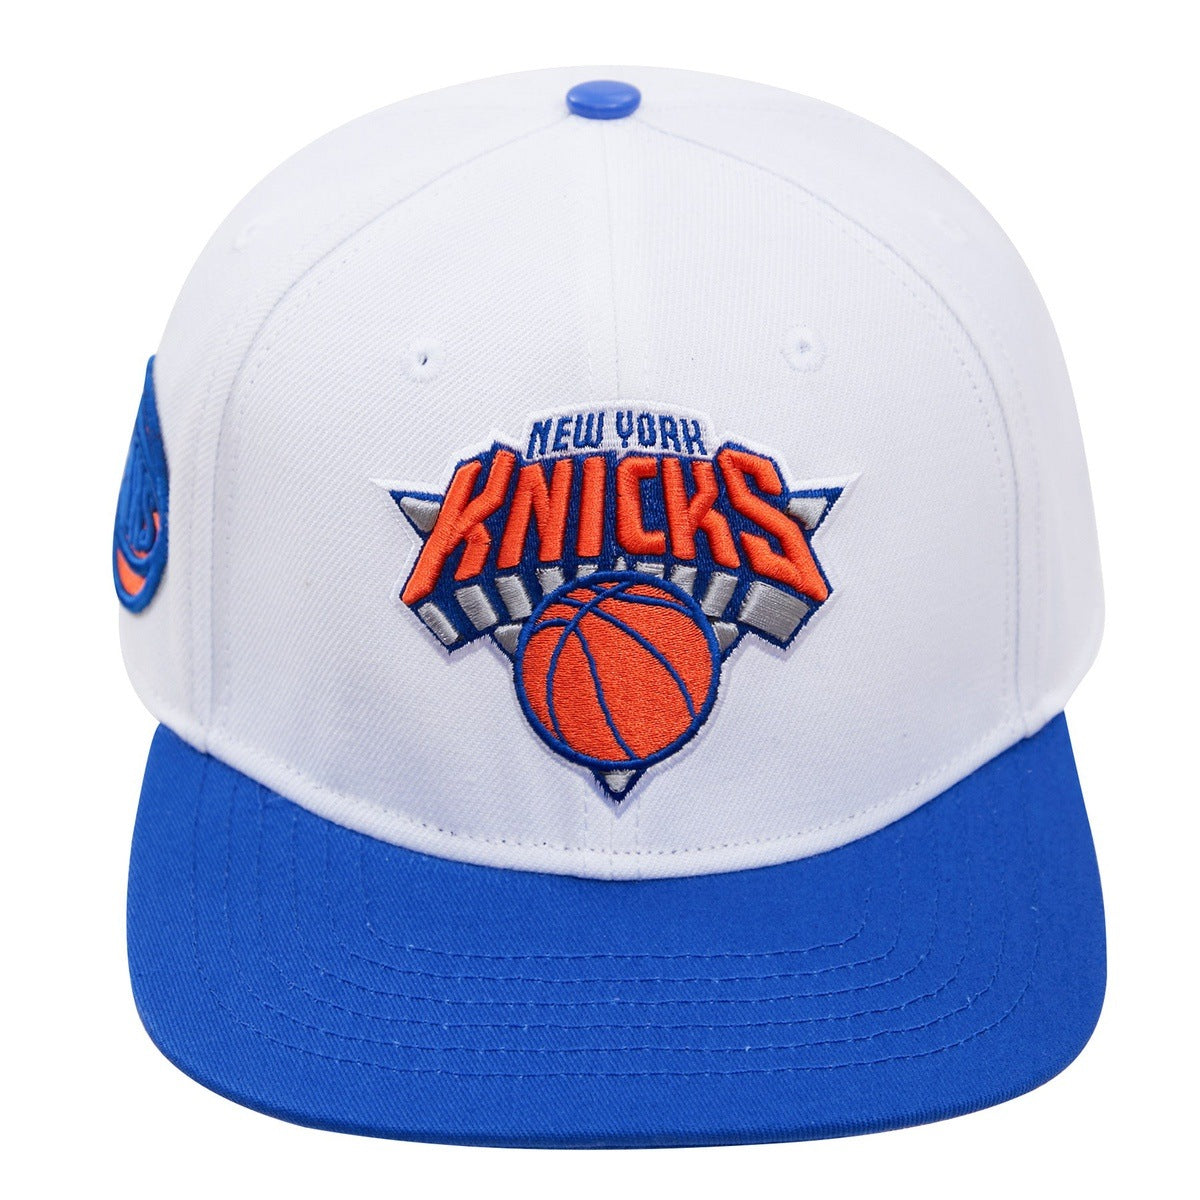  NBA New York Knicks White Front Basic 5950 Fitted Cap (, 678)  : Sports Fan Baseball Caps : Sports & Outdoors